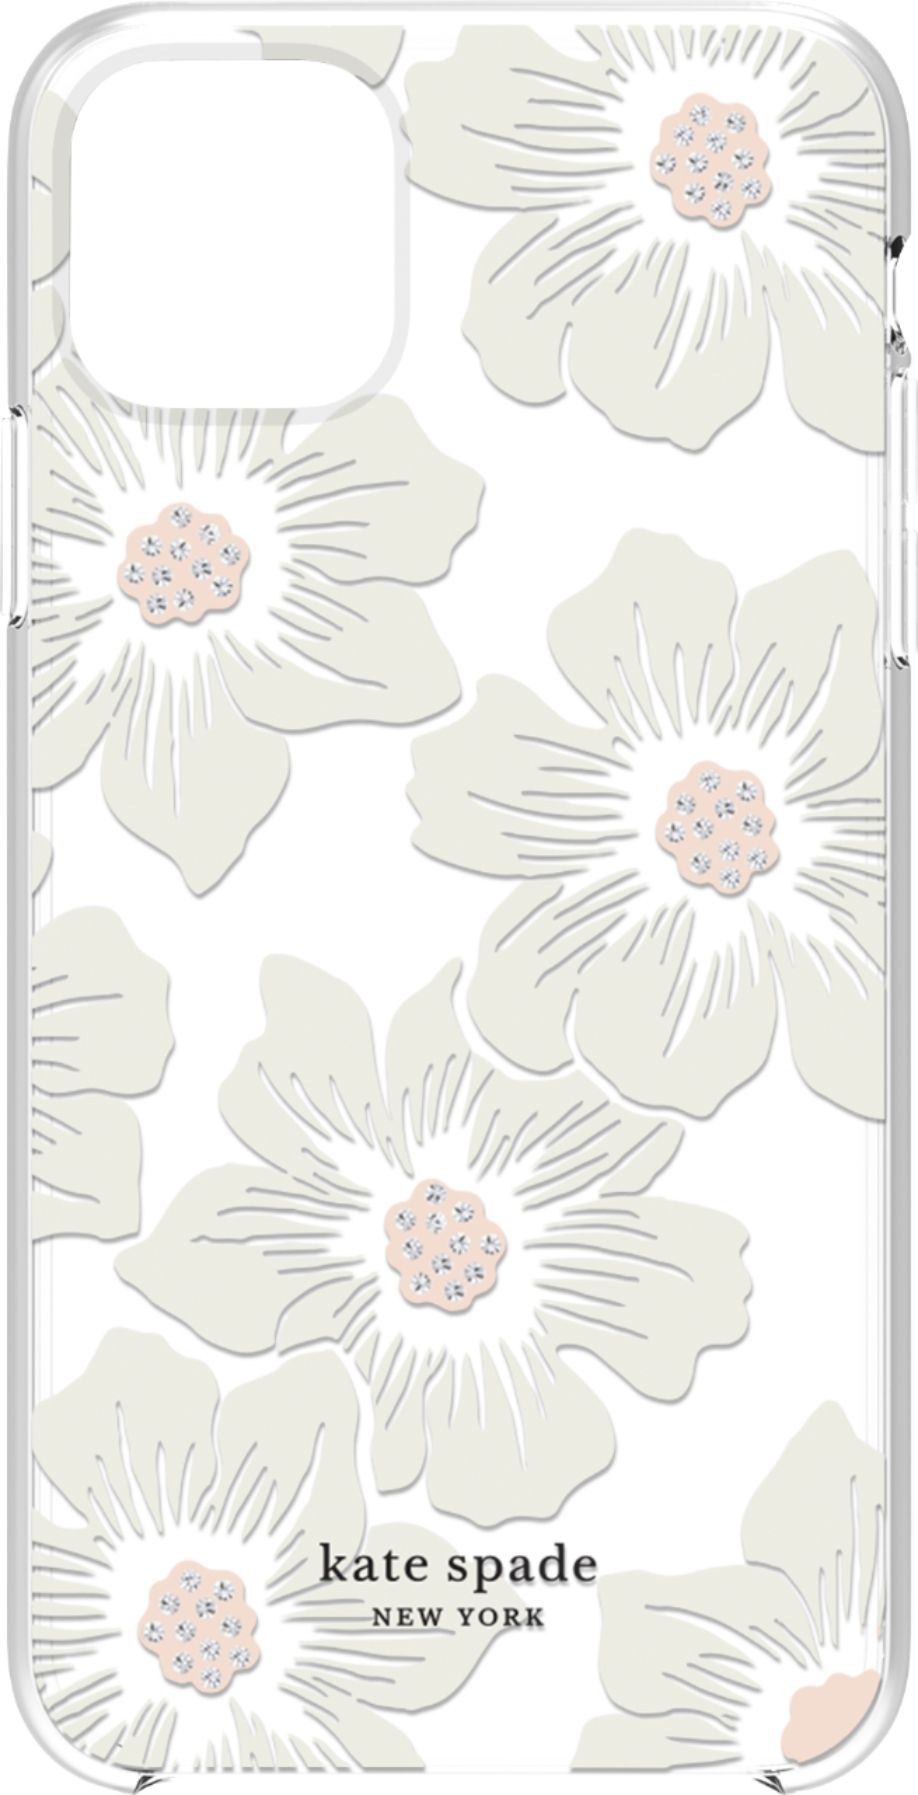 kate spade new york Protective Hard Shell Case for Apple® iPhone® 11 Pro  Max Cream With Stones/Hollyhock Floral Clear KSIPH-132-HHCCS - Best Buy